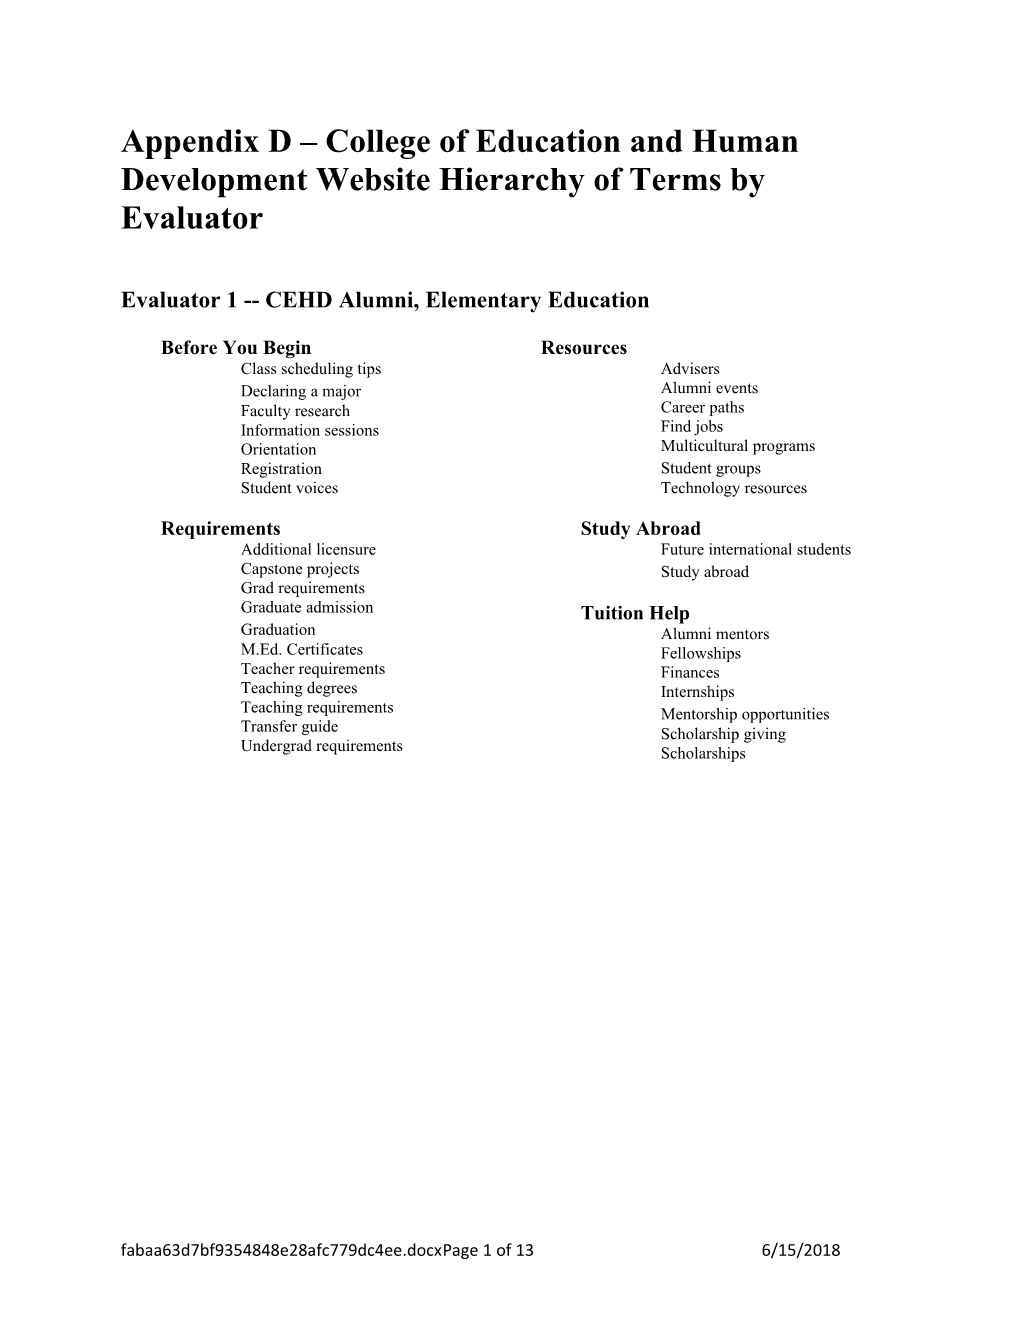 Appendix D College of Education and Human Development Website Hierarchy of Terms by Evaluator